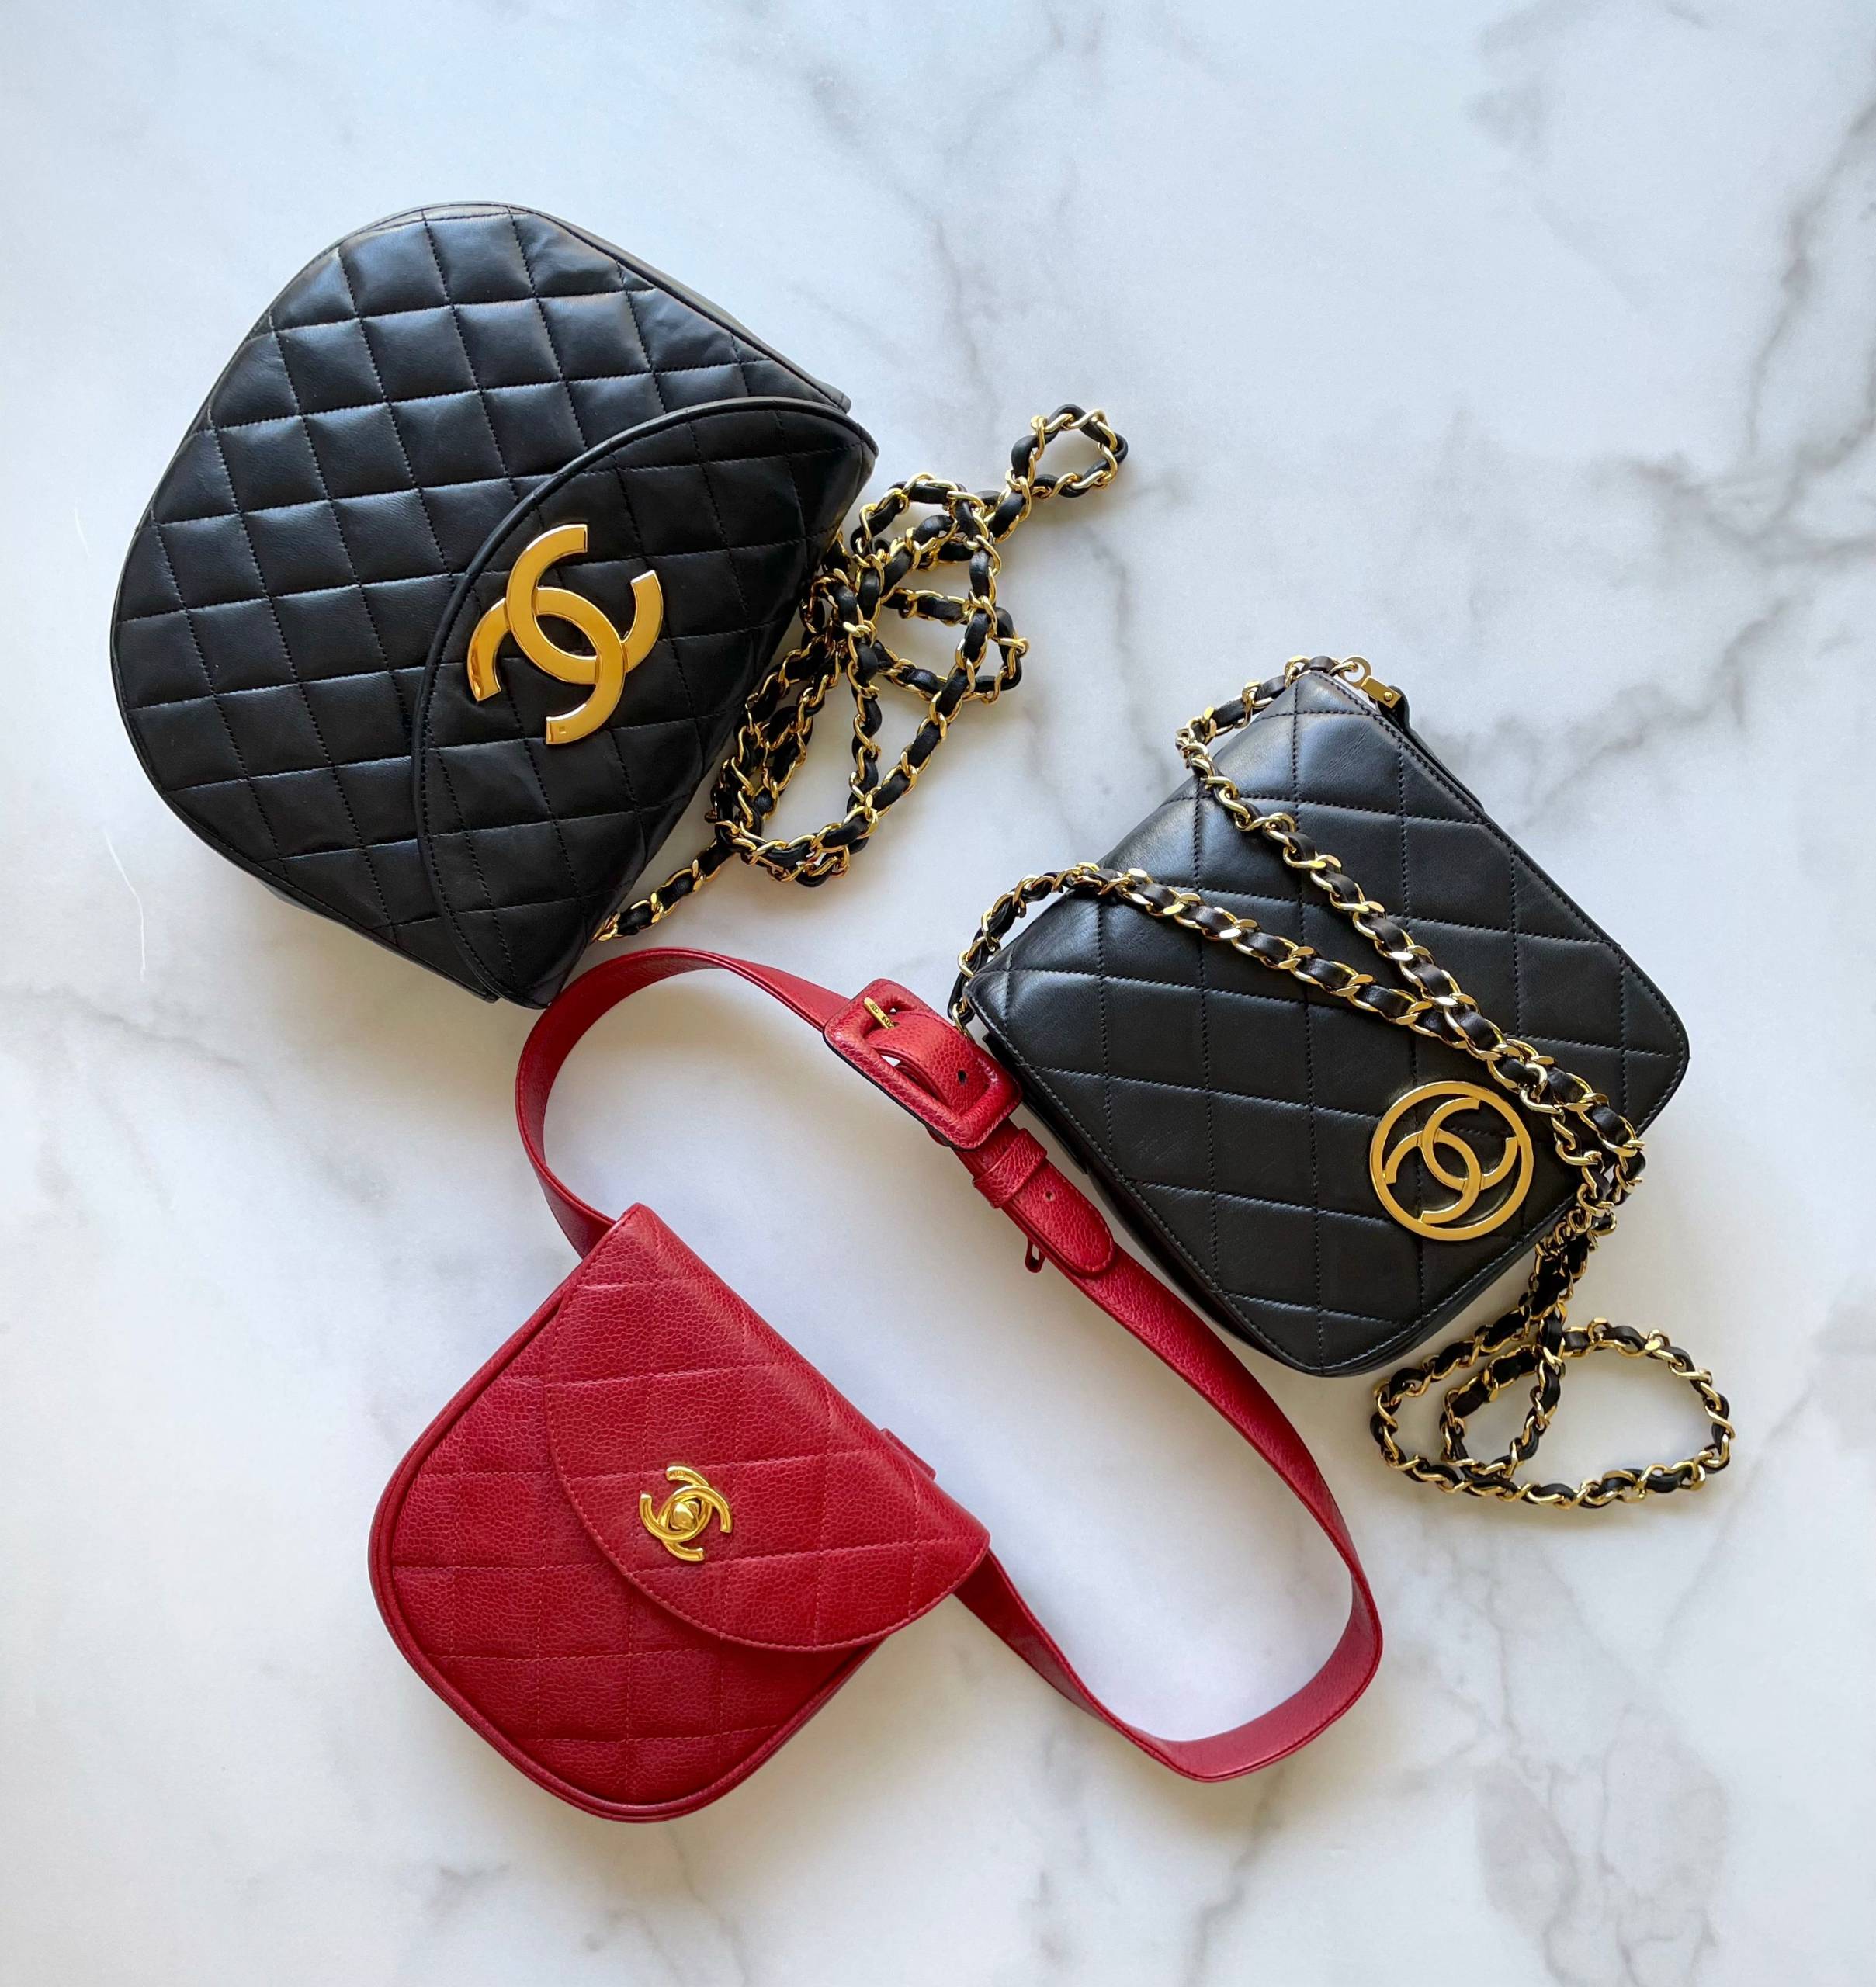 Did I score a good deal with this $1700 vintage Chanel? My partner